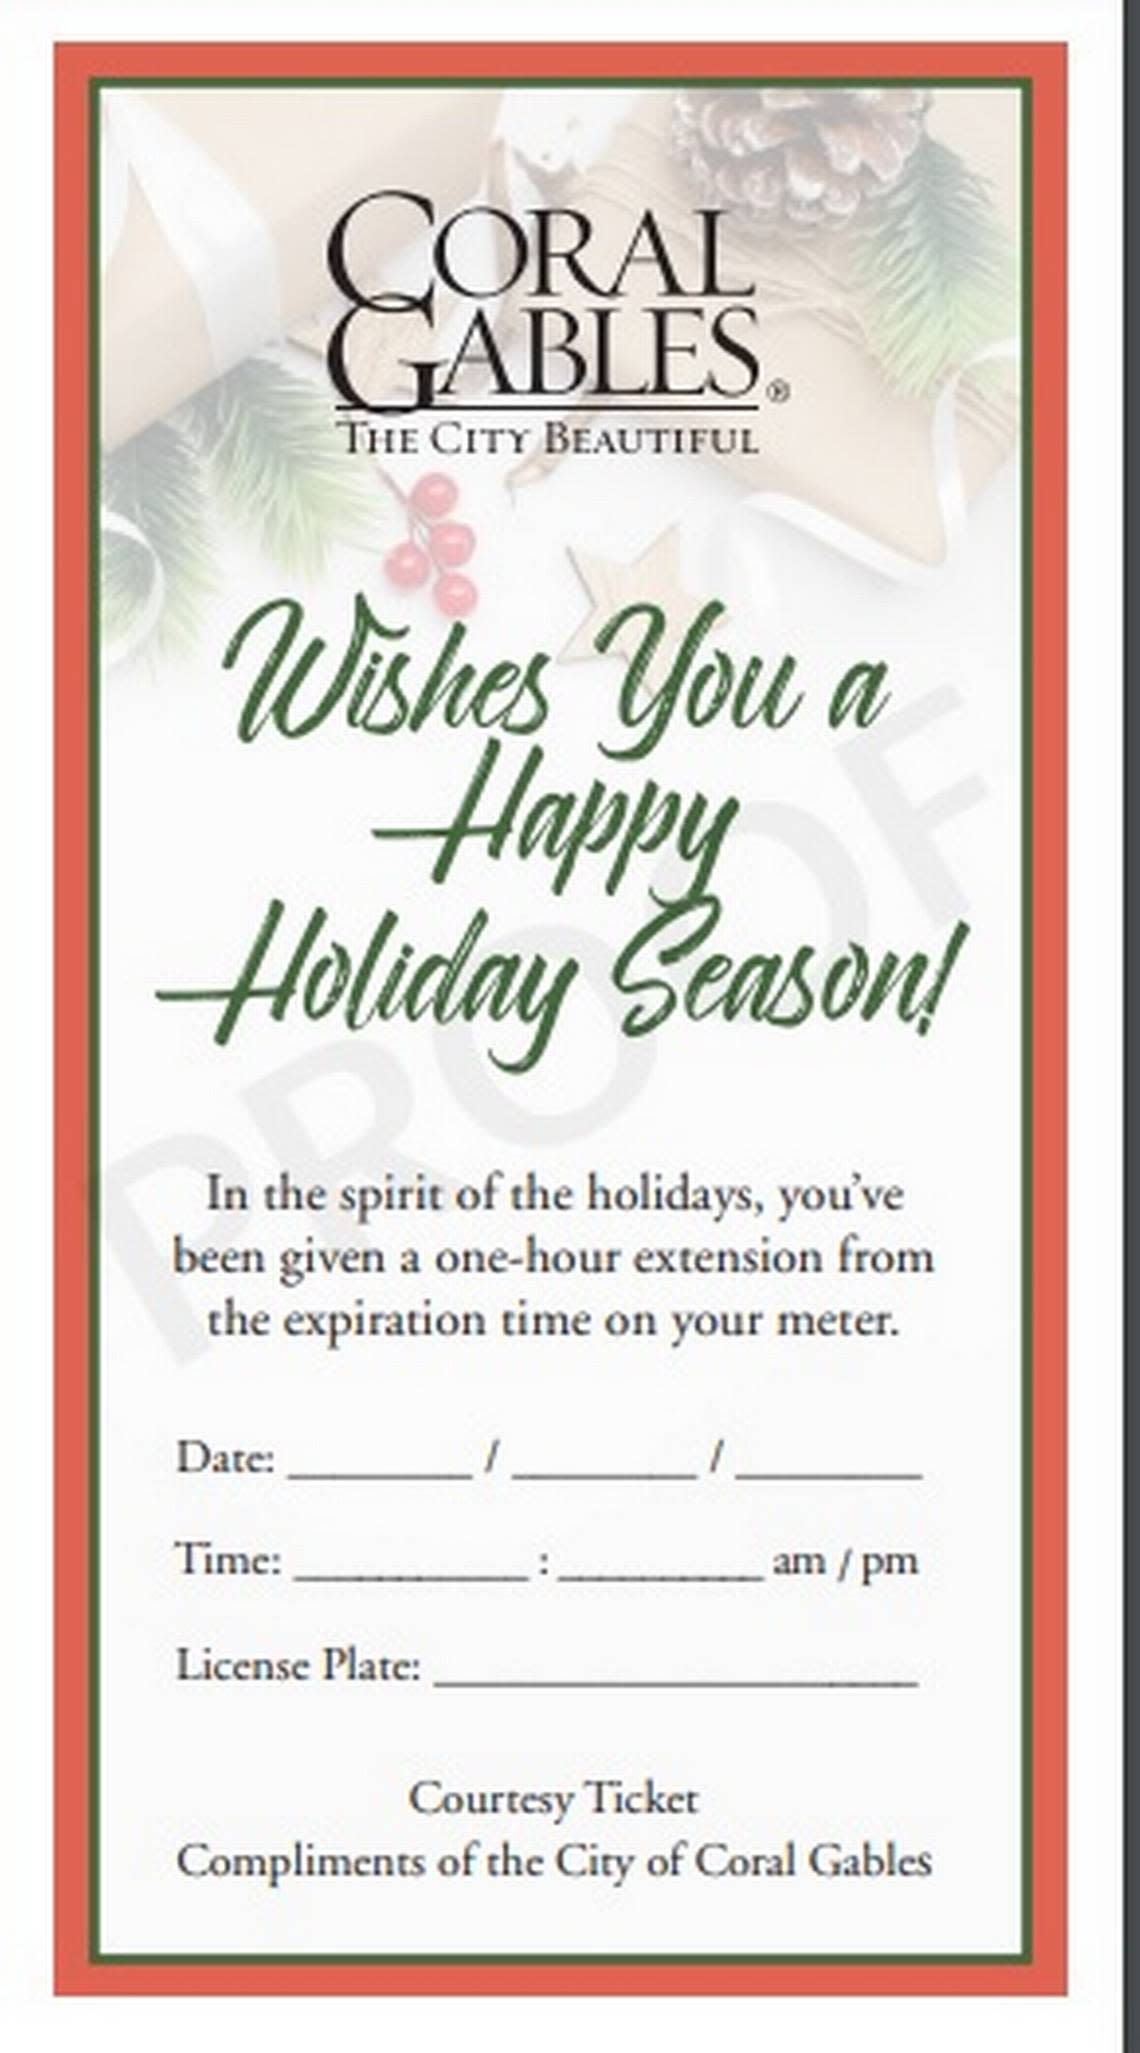 Coral Gables will give patrons a one-hour reprieve from parking tickets on Dec. 5 to Dec. 25 for metered parking. Instead of a citation city officials will place a holiday courtesy ticket card.